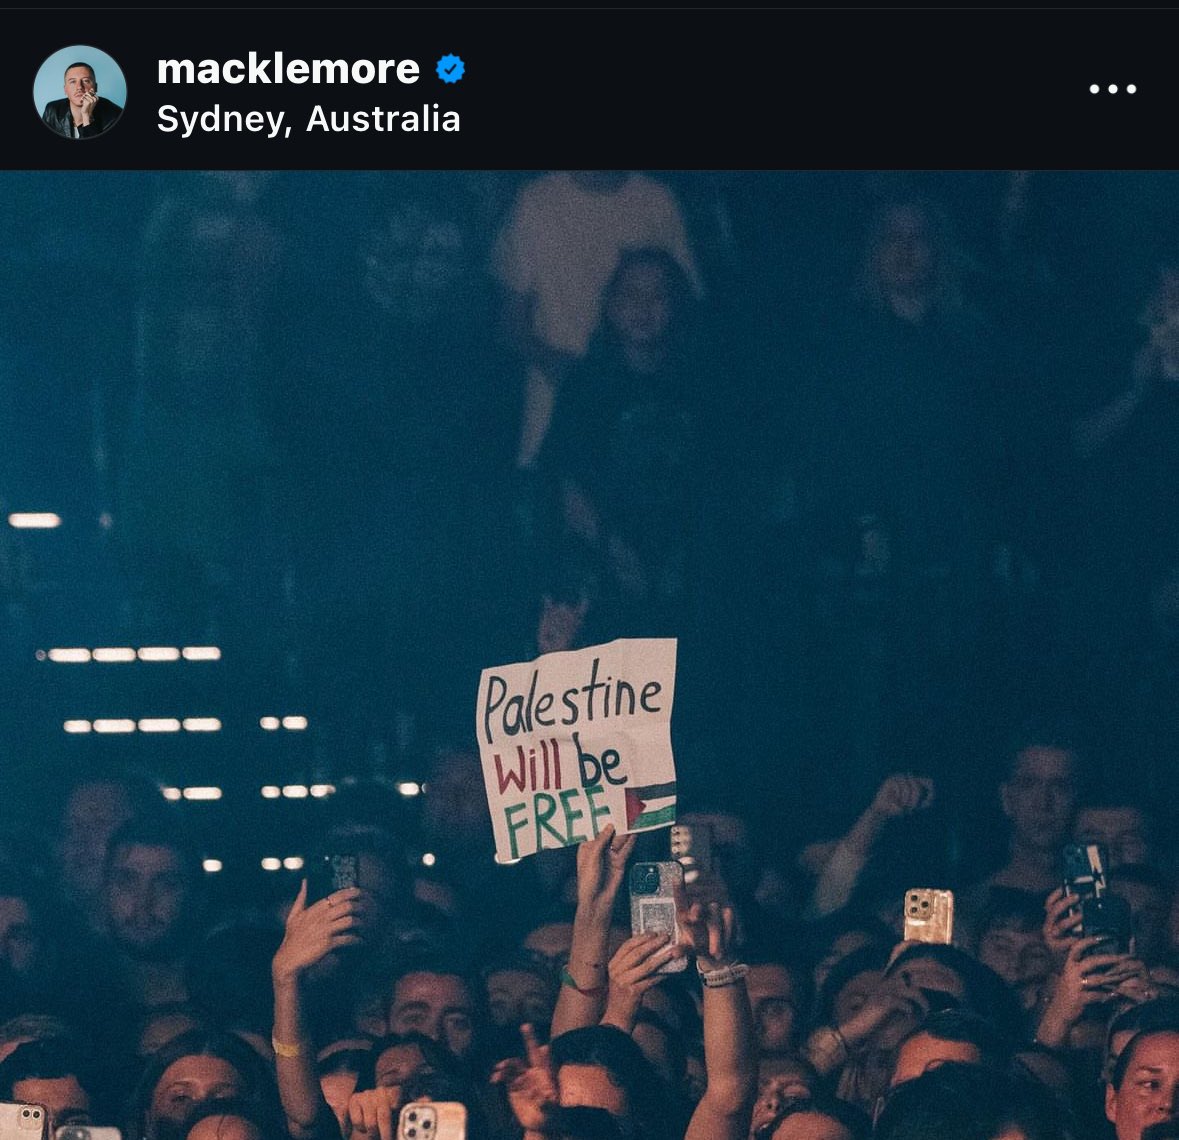 It’s the way Macklemore is doing more for Palestine than Dj Khaled who’s a Palestinian himself 😭😭😭